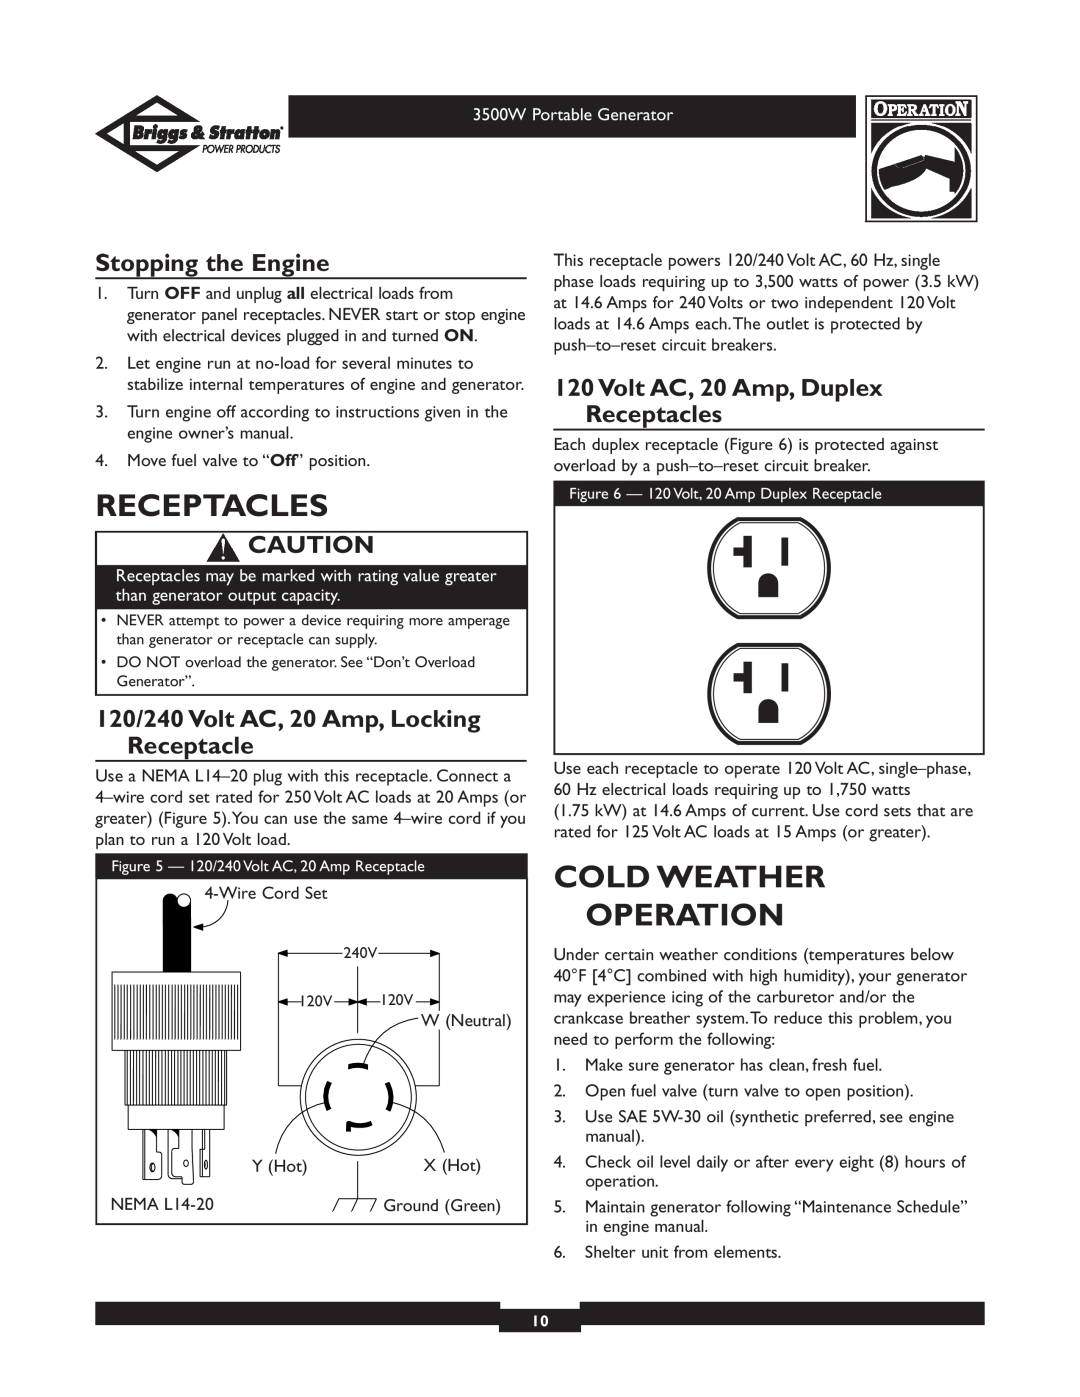 Briggs & Stratton 30208 owner manual Cold Weather Operation, Stopping the Engine, Volt AC, 20 Amp, Duplex Receptacles 